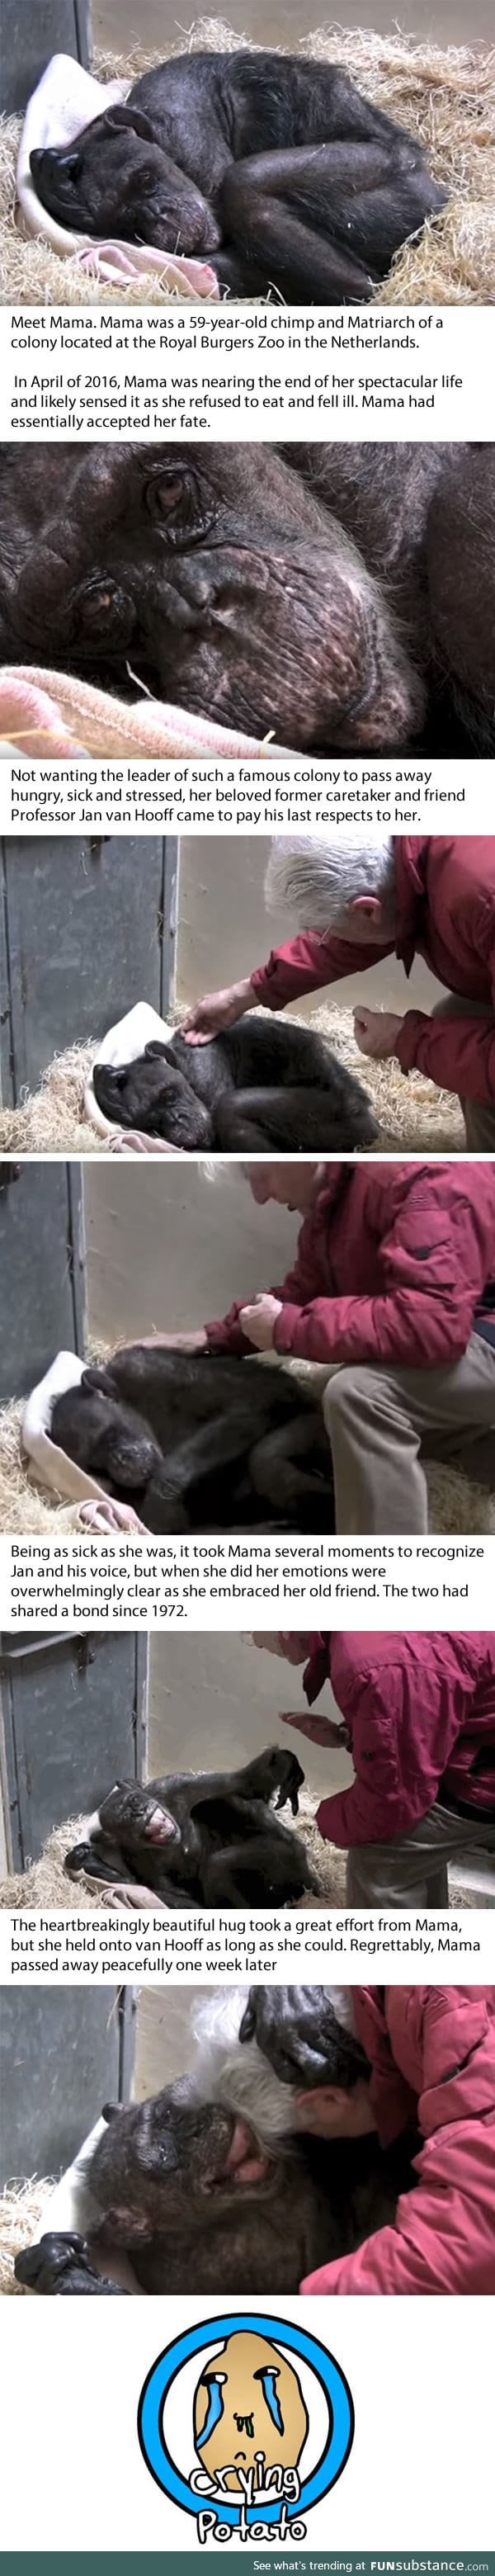 Dying 59-Year-Old Chimp Recognises Her Old Caretaker's Voice